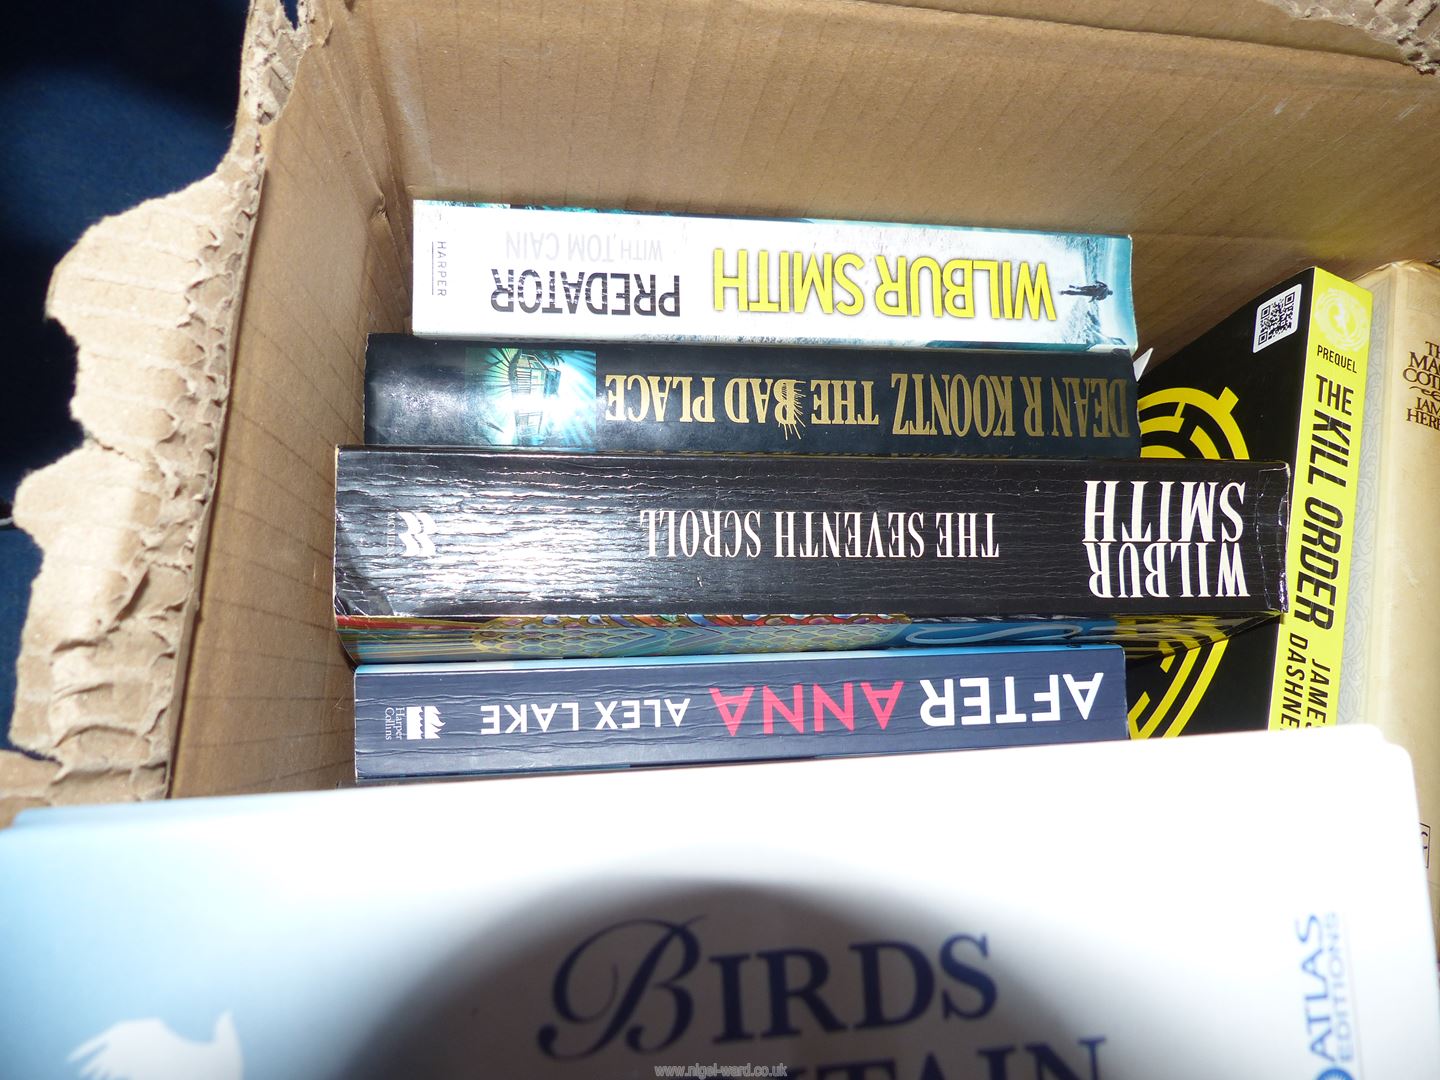 A box of Books to include Cookbooks, Birds of Britain, Wilbur Smith, James Herbert, etc. - Image 4 of 4